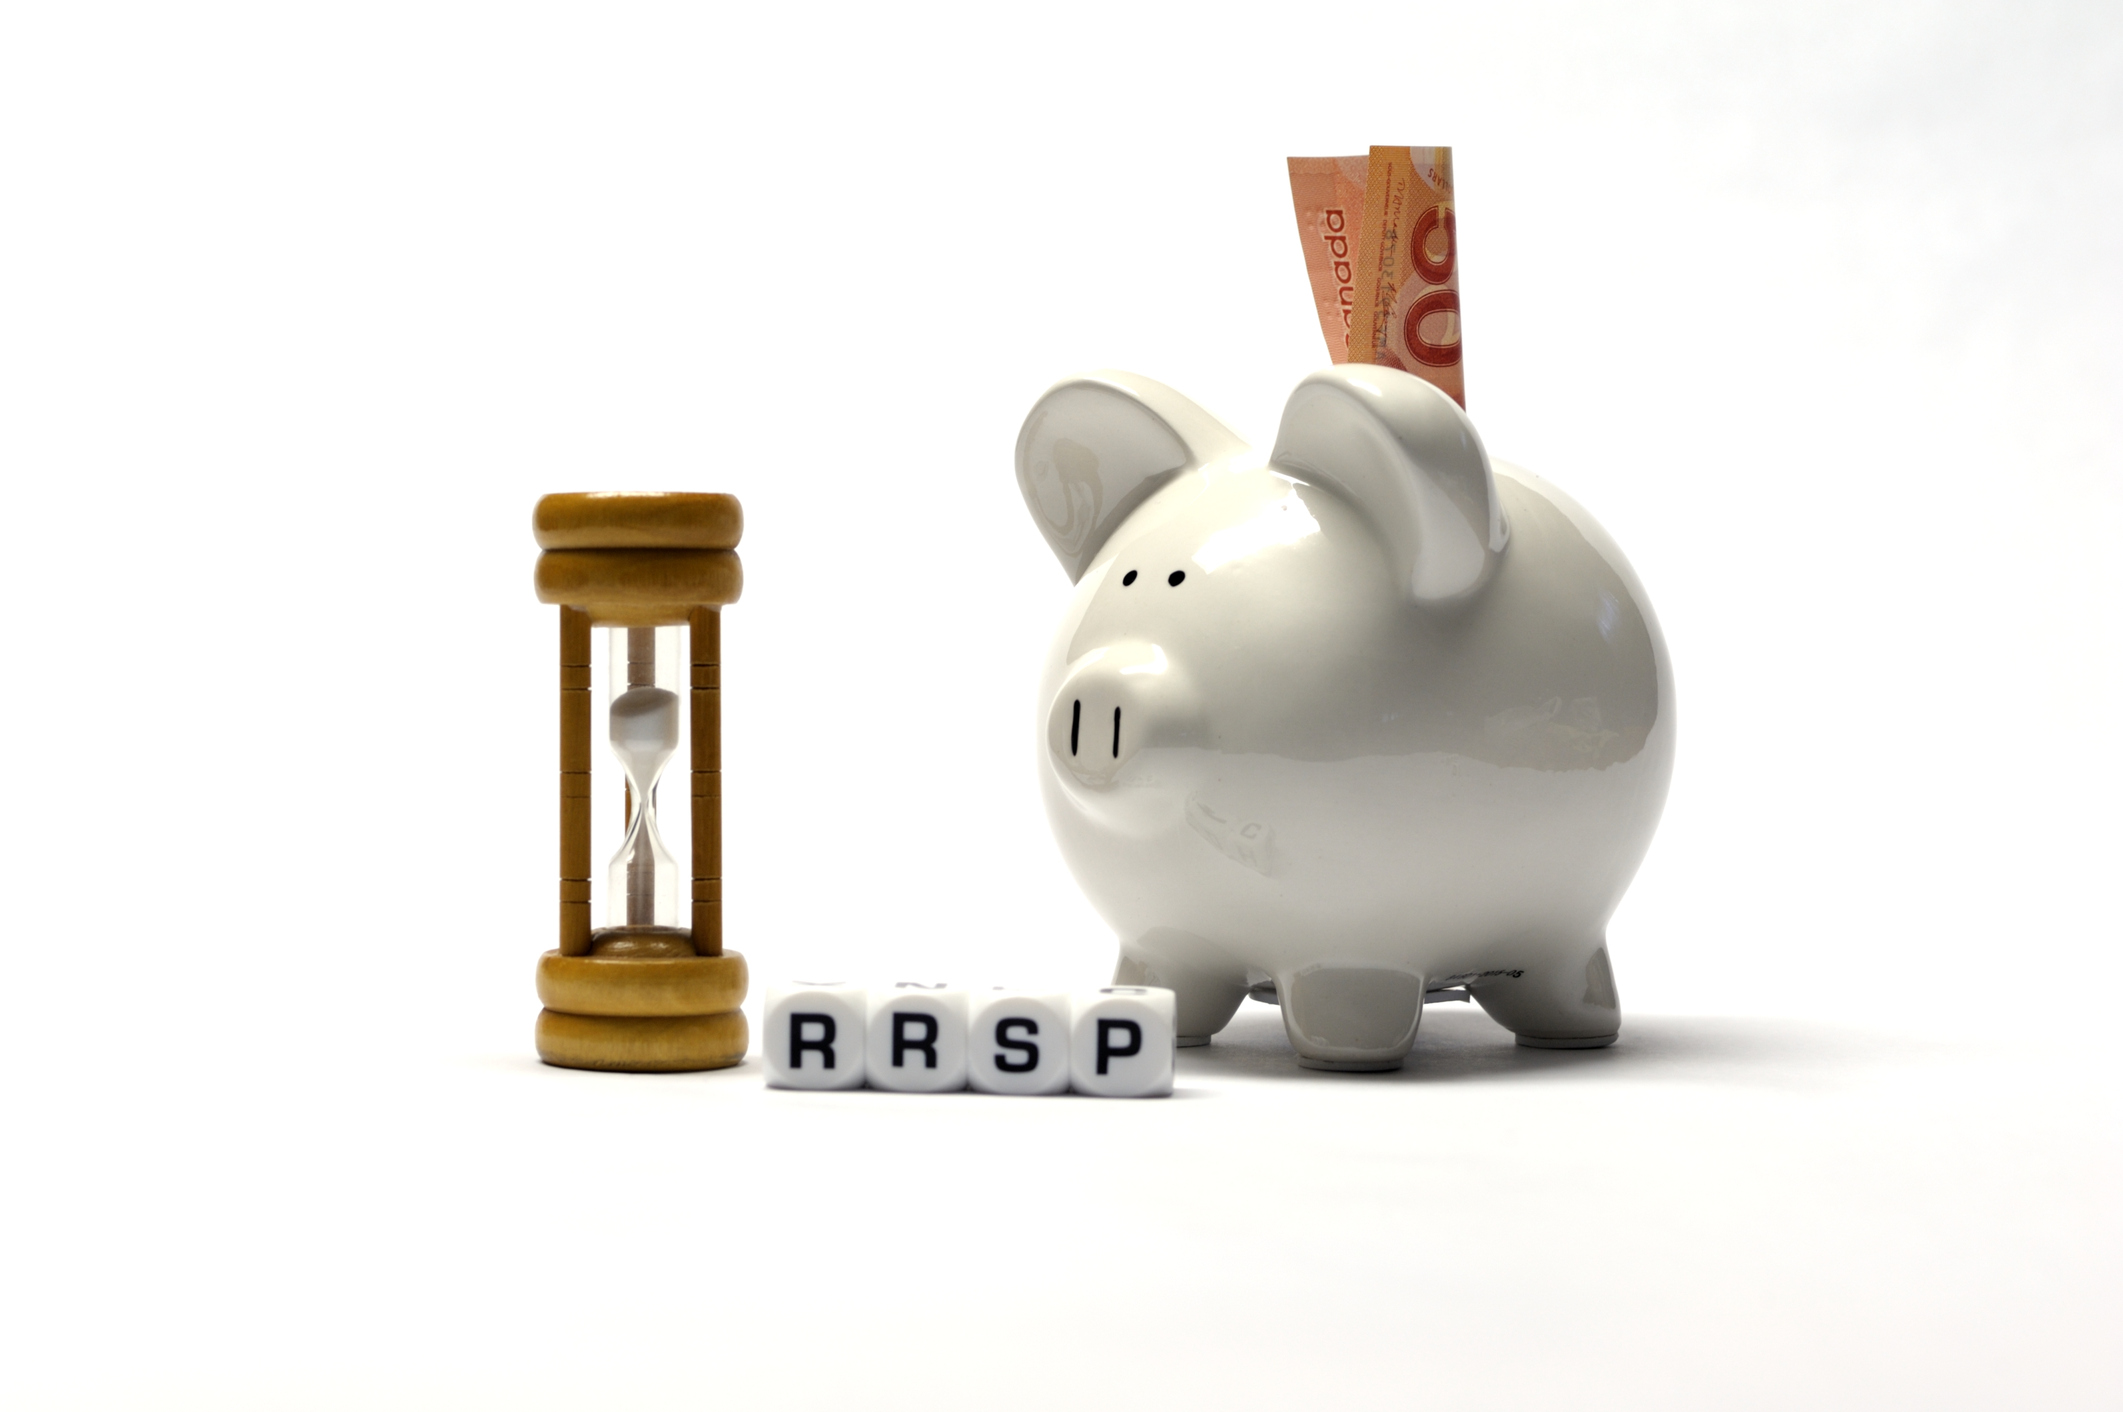 RRSP Contribution Season: It's That Time of Year Again